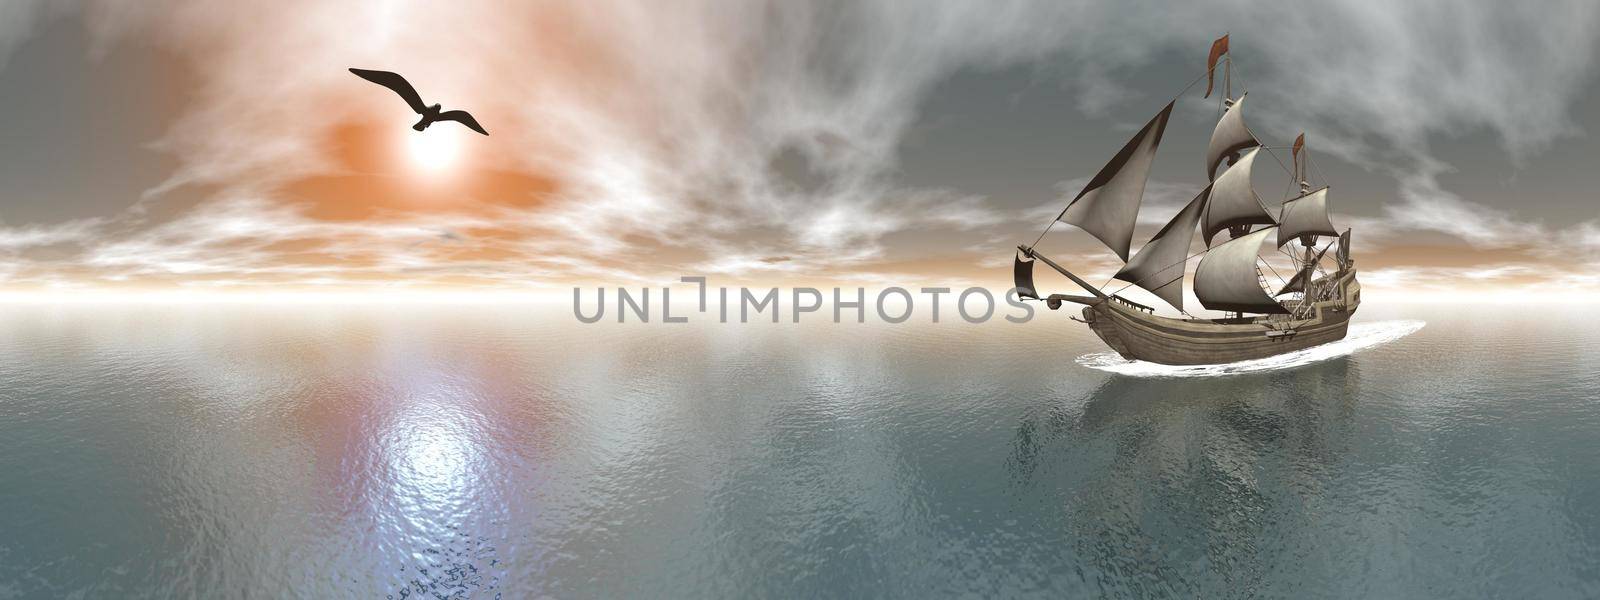 Pirate ship, 360 degrees effect - 3D render by Elenaphotos21